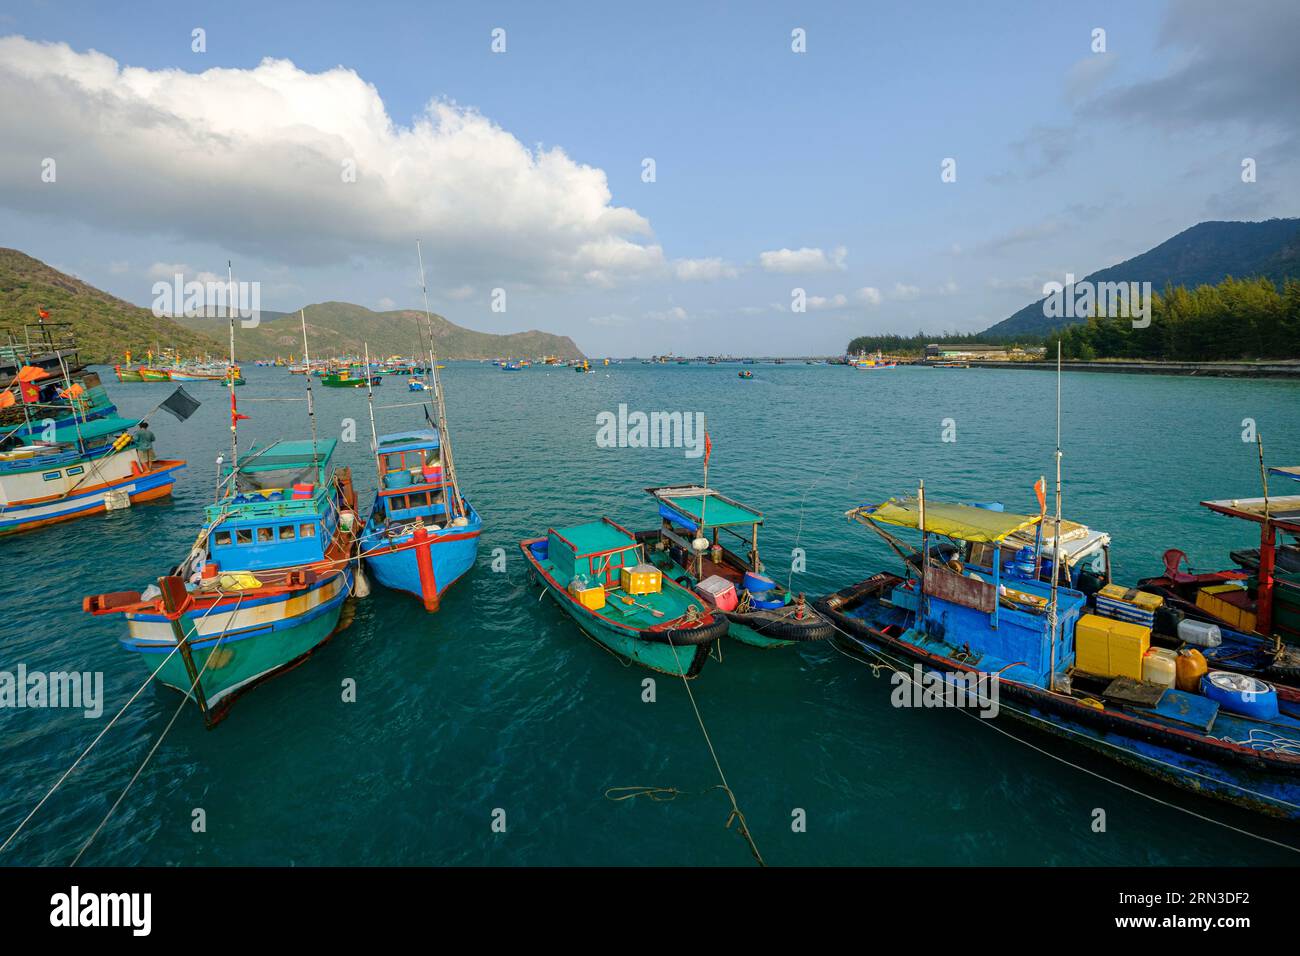 Vietnam, Archipelago of Con Dao, called Poulo-Condor islands during french colonisation, Con son island, Thu Tam fishing port Stock Photo